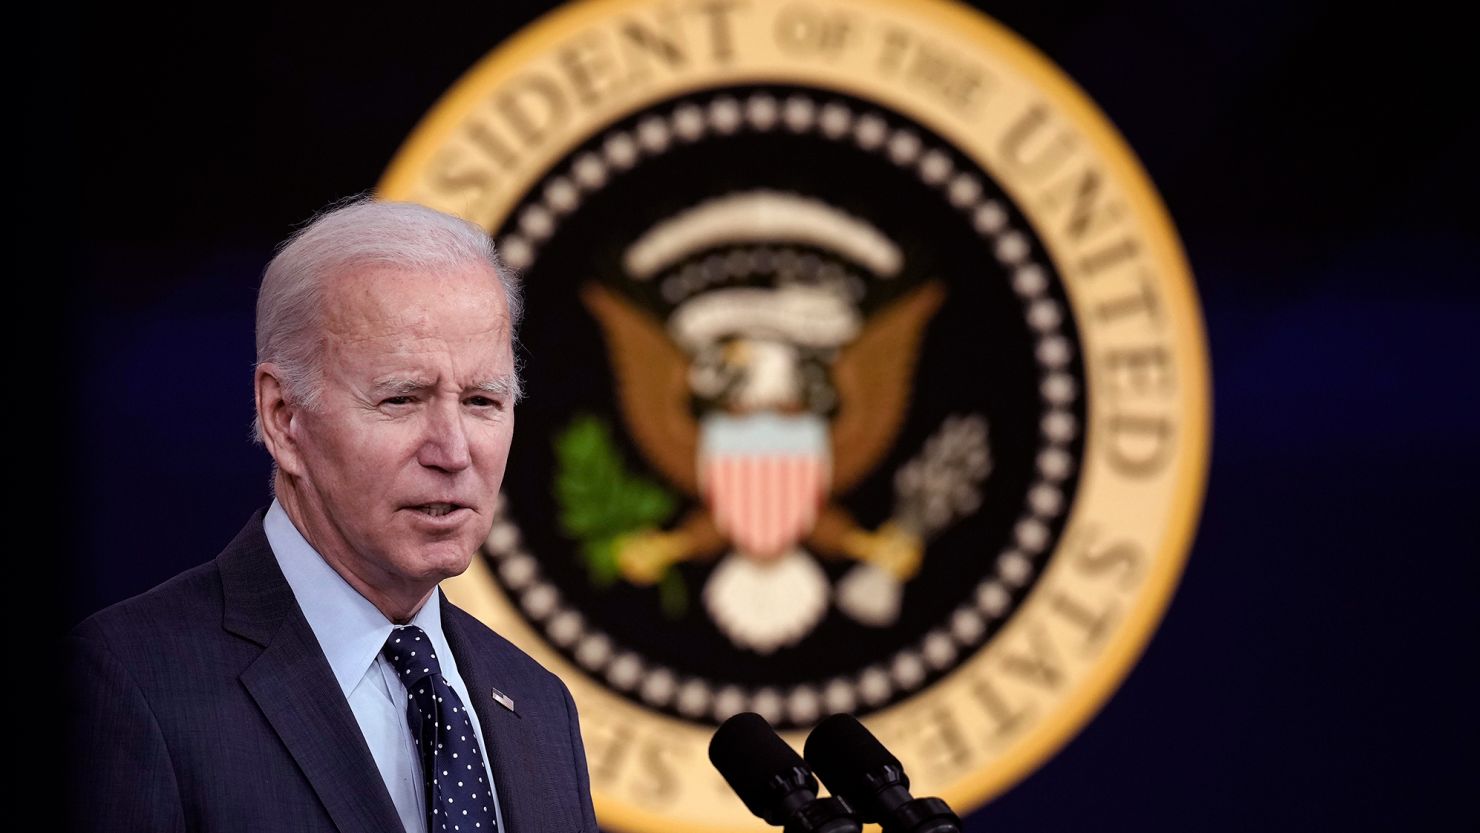 President Joe Biden speaks in the South Court Auditorium at the White House complex February 16, 2023 in Washington, DC.